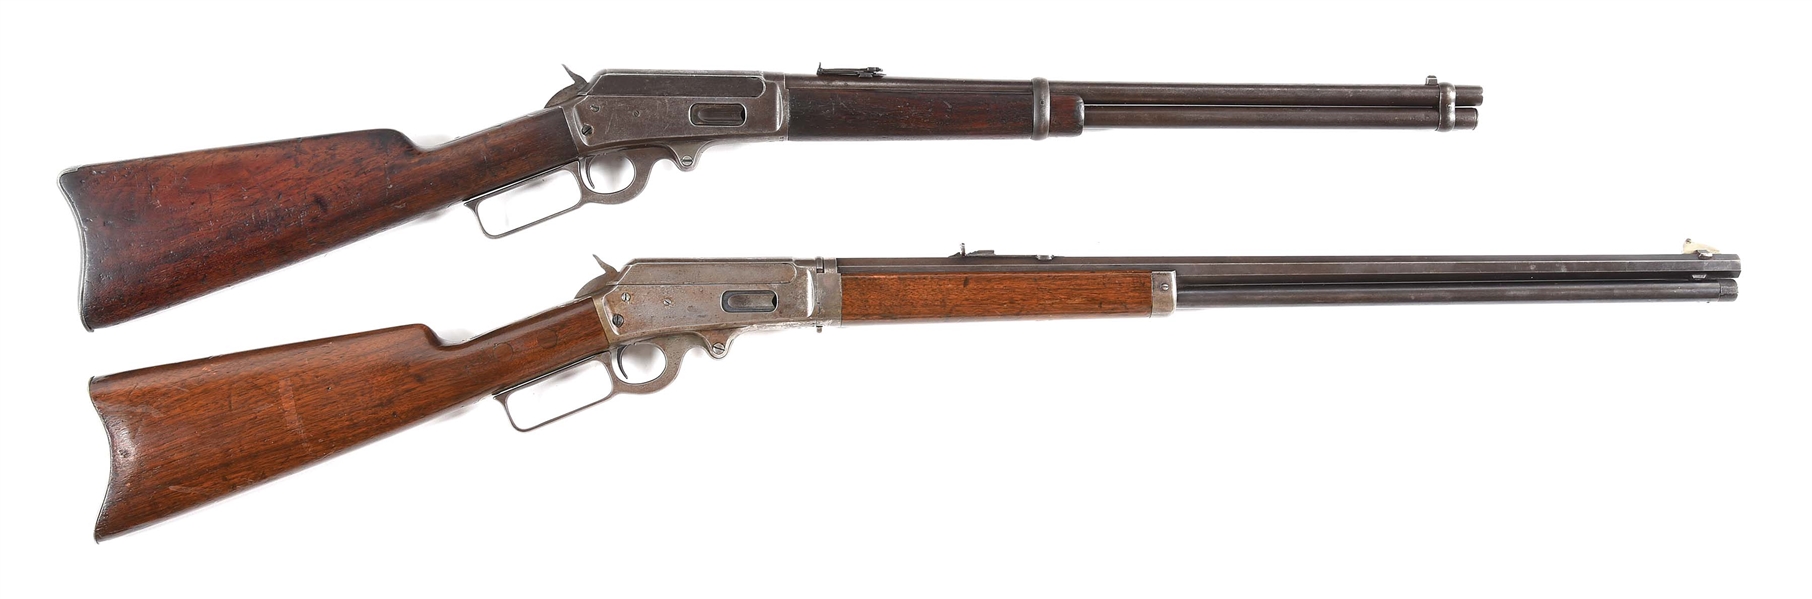 (C) LOT OF 2: MARLIN 1893 LEVER ACTION RIFLE AND CARBINE.